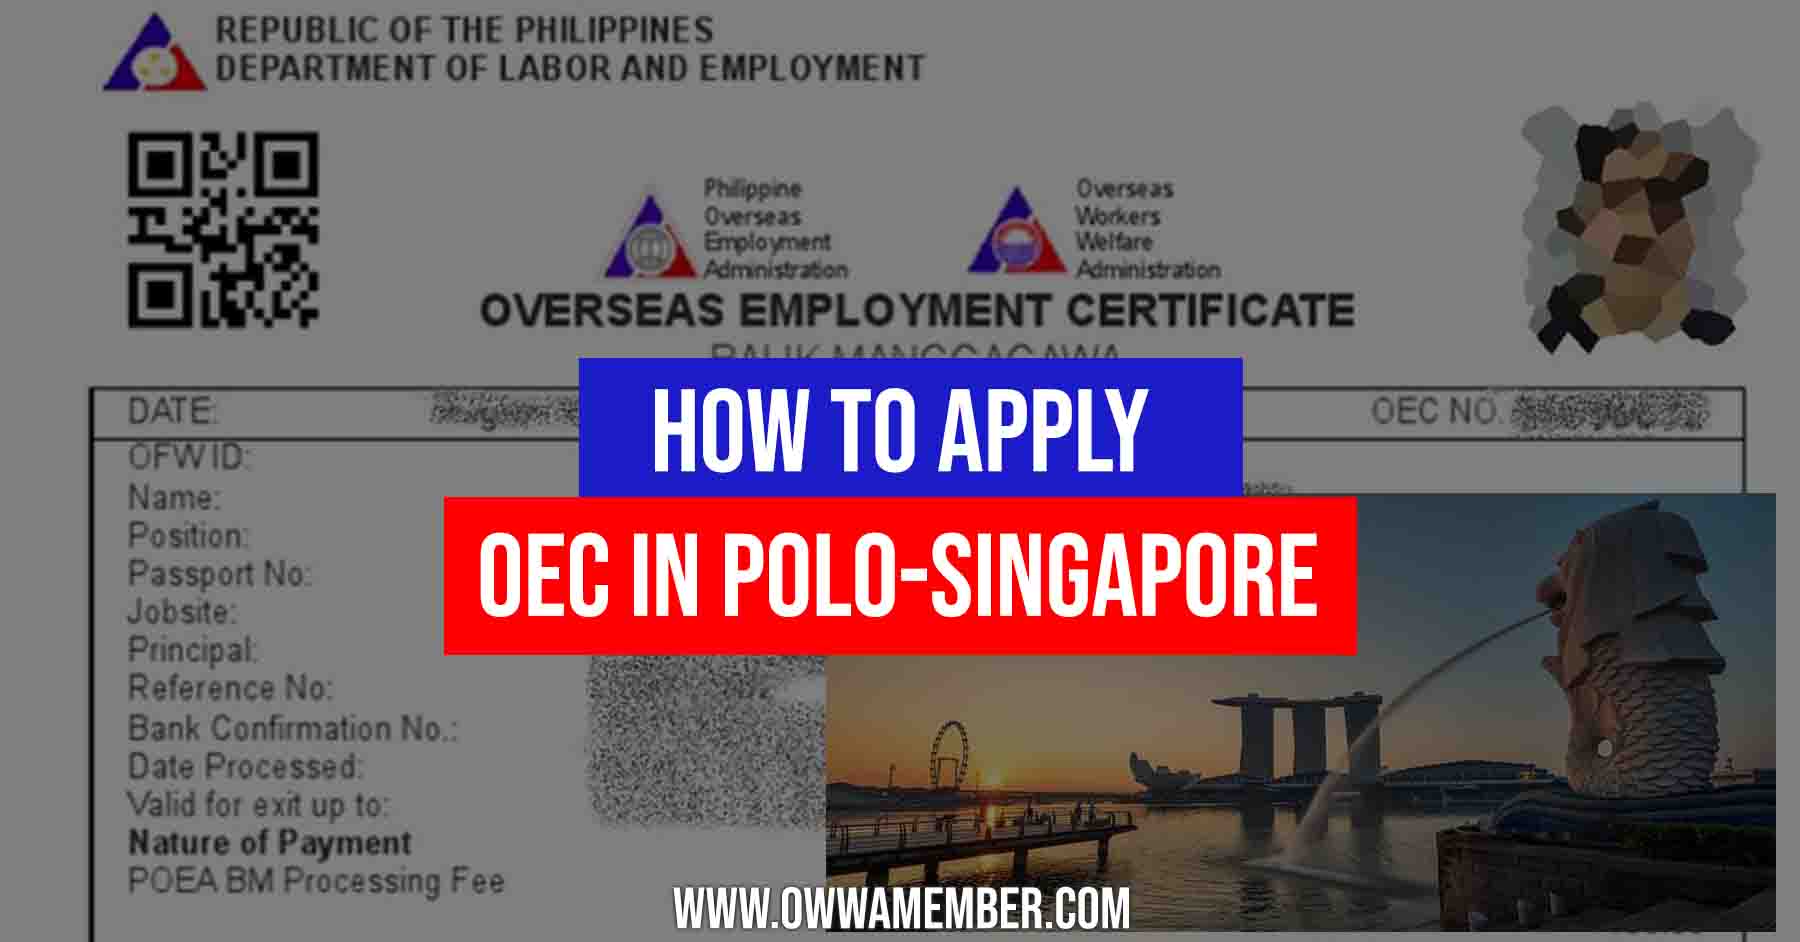 how to apply oec in polo singapore